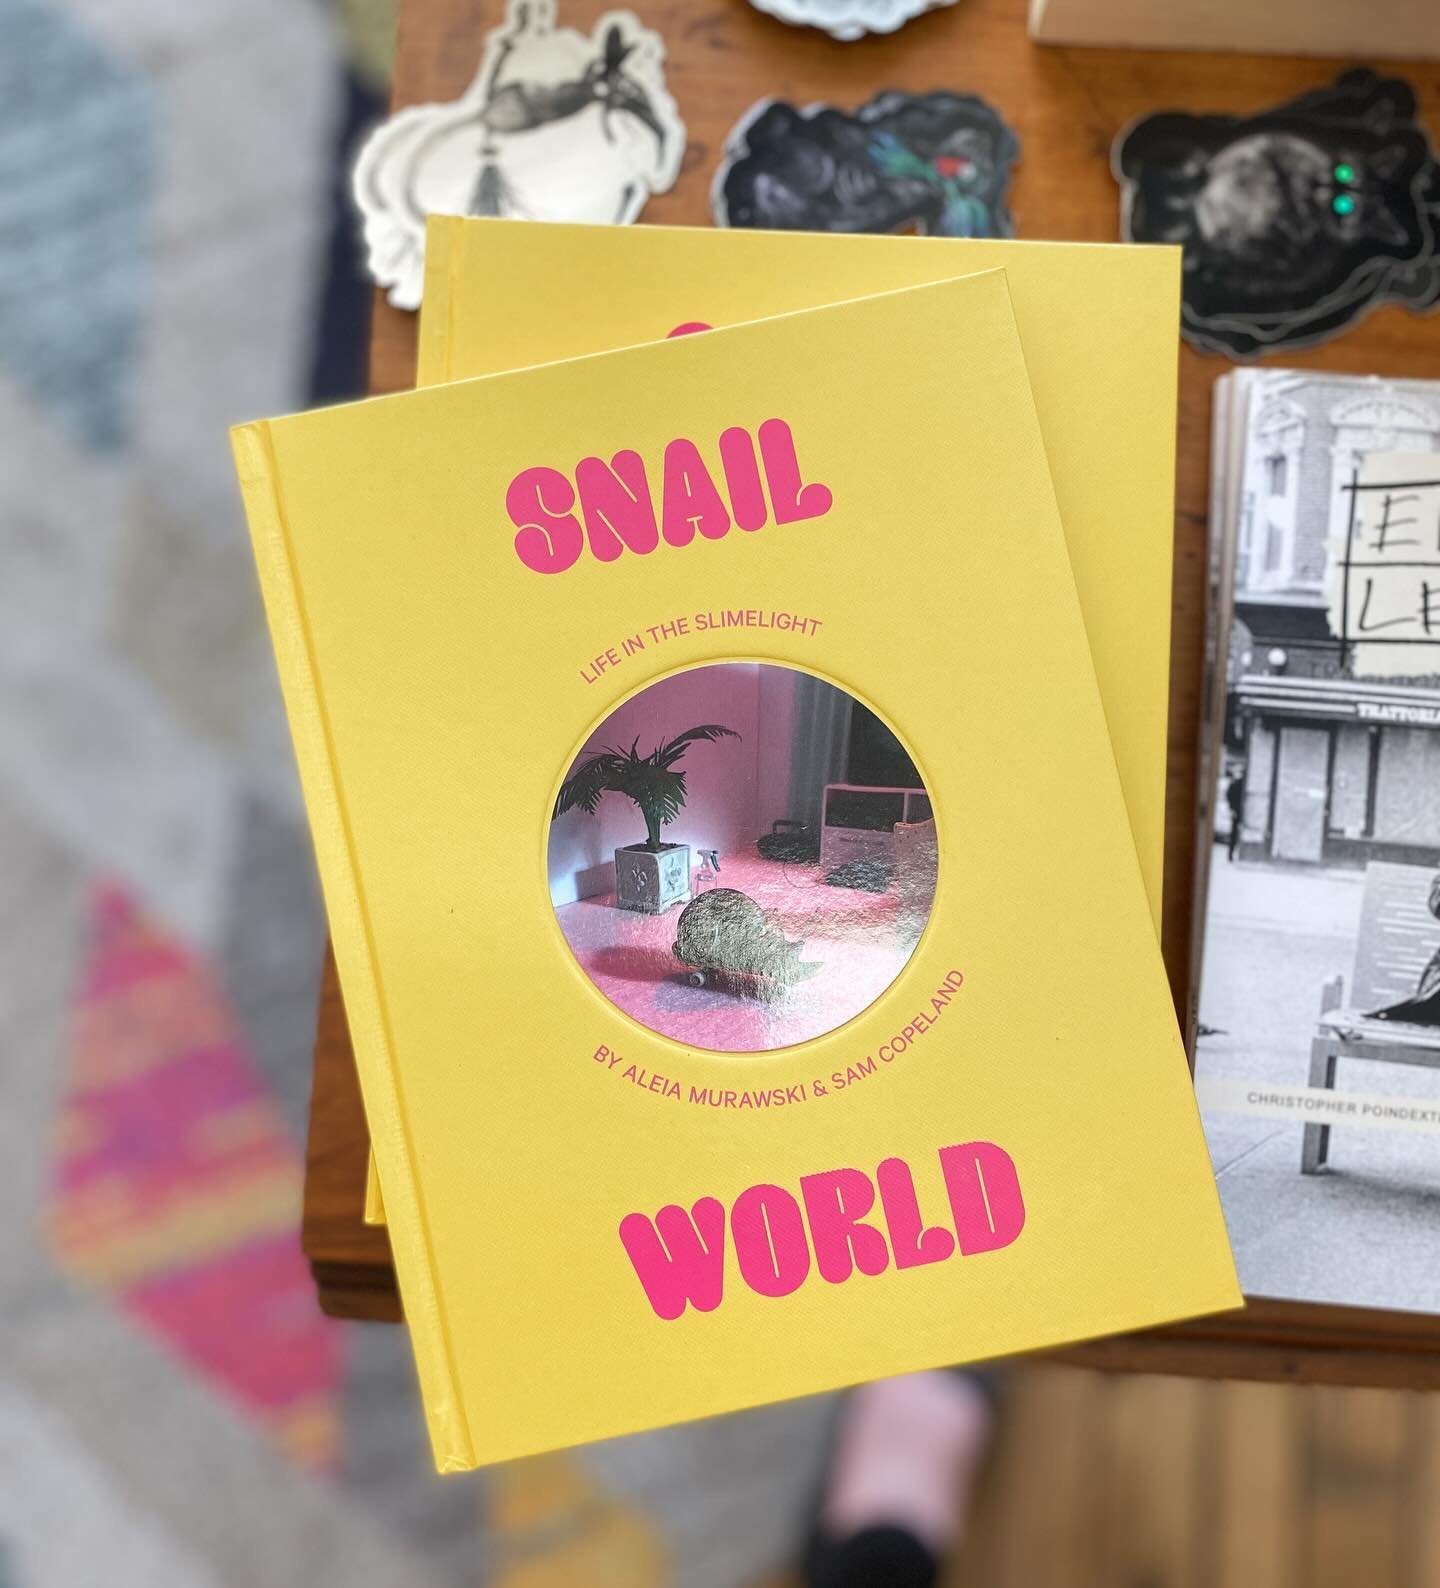 🐌 Snail World: Life in the Slimelight is a collection of absorbing snapshots from an alternate universe where snails drink bubble tea at the mall, ride scooters, and get beamed up into flying saucers. 

Real snails and frogs bring to life miniature 